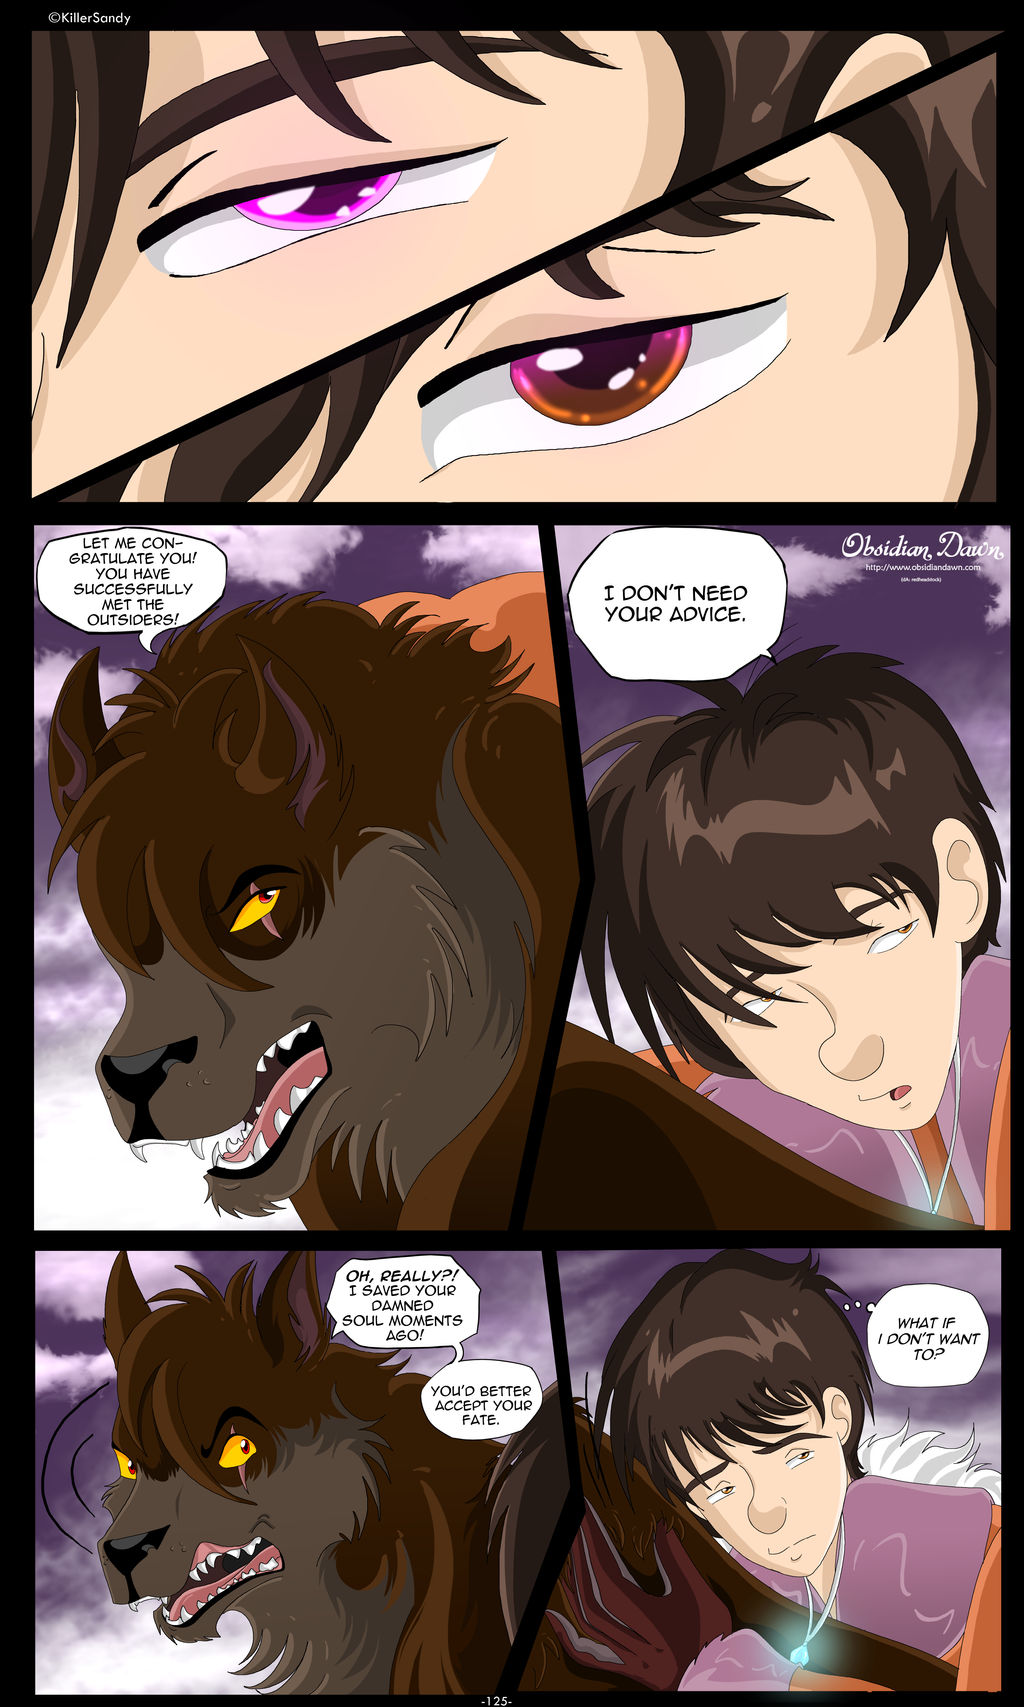 The Prince of the Moonlight Stone page 125